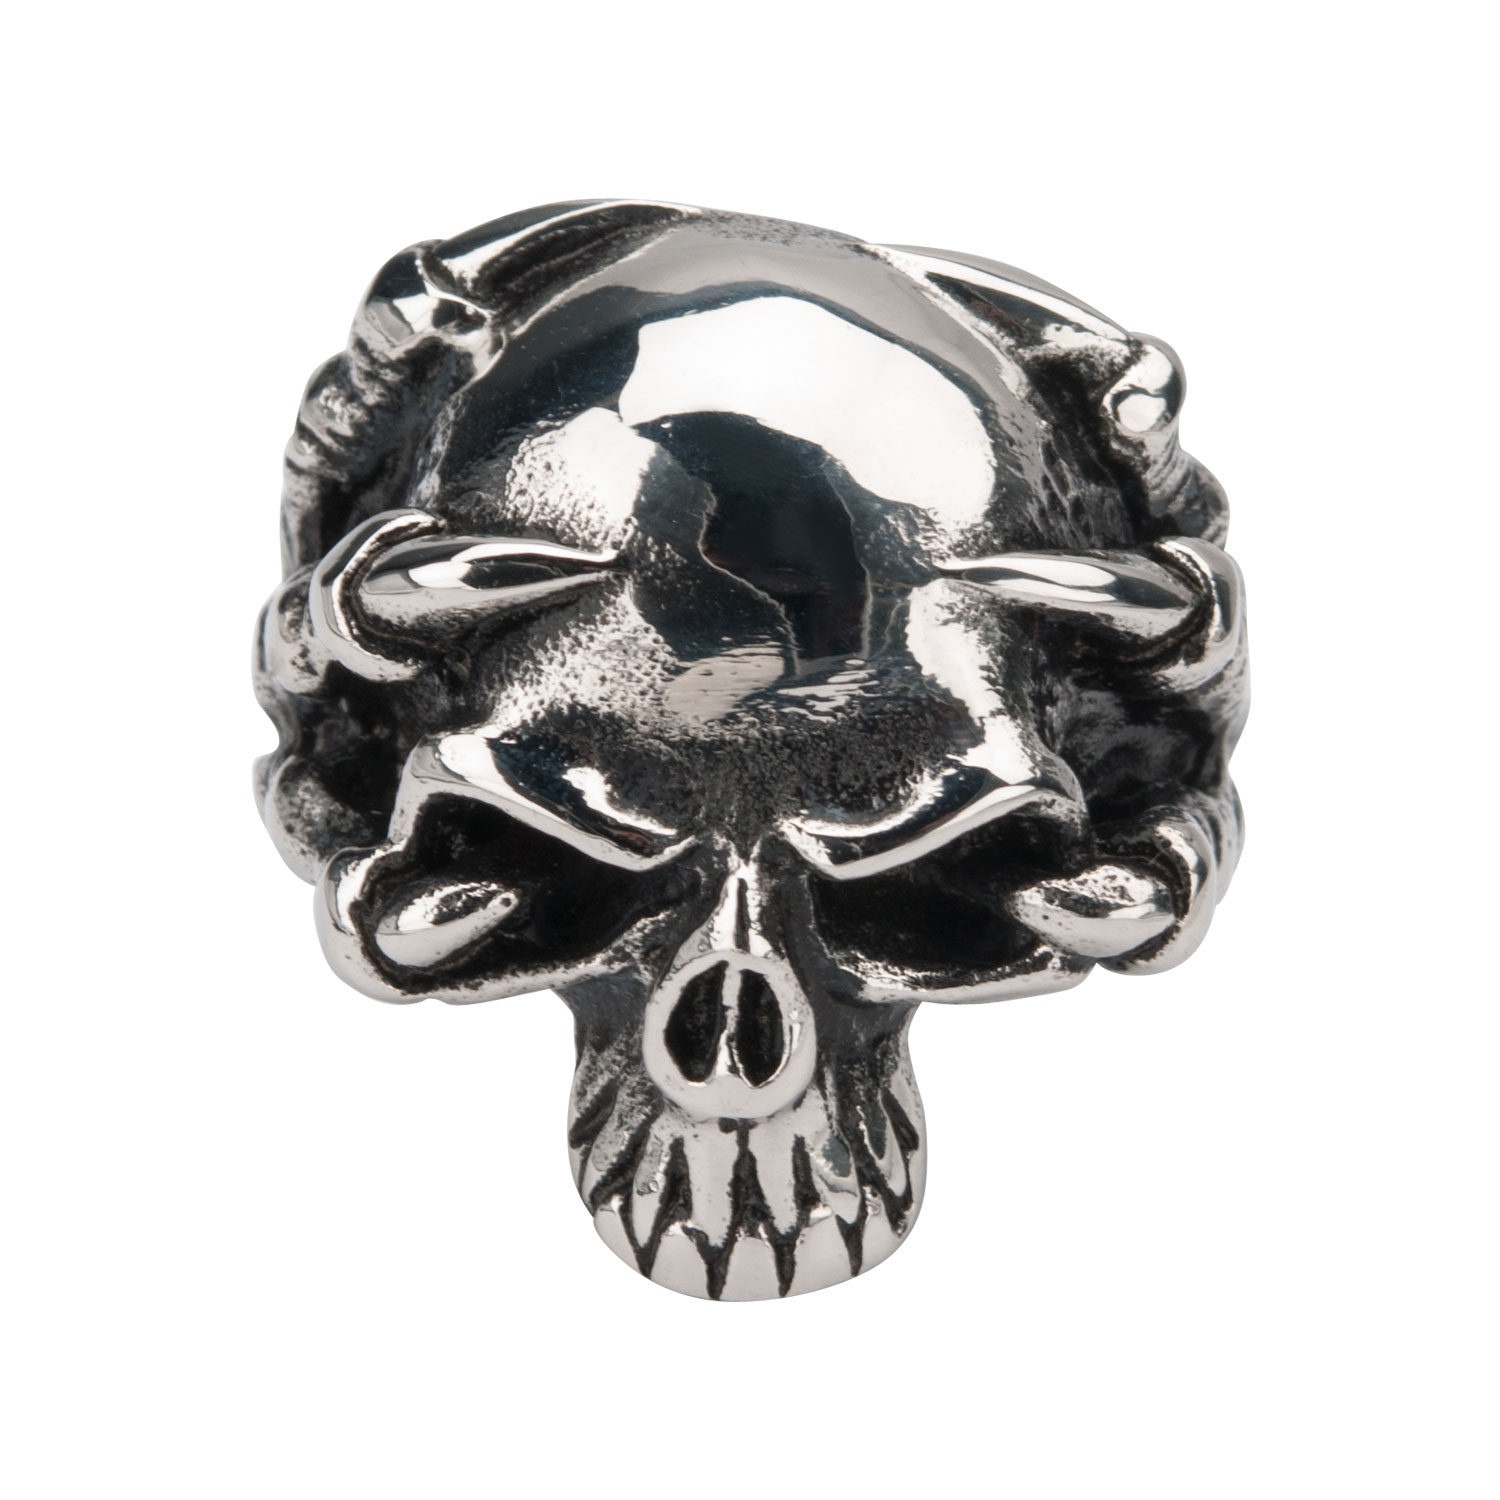 Black Oxidized Skull Ring with Claws Image 2 Enchanted Jewelry Plainfield, CT